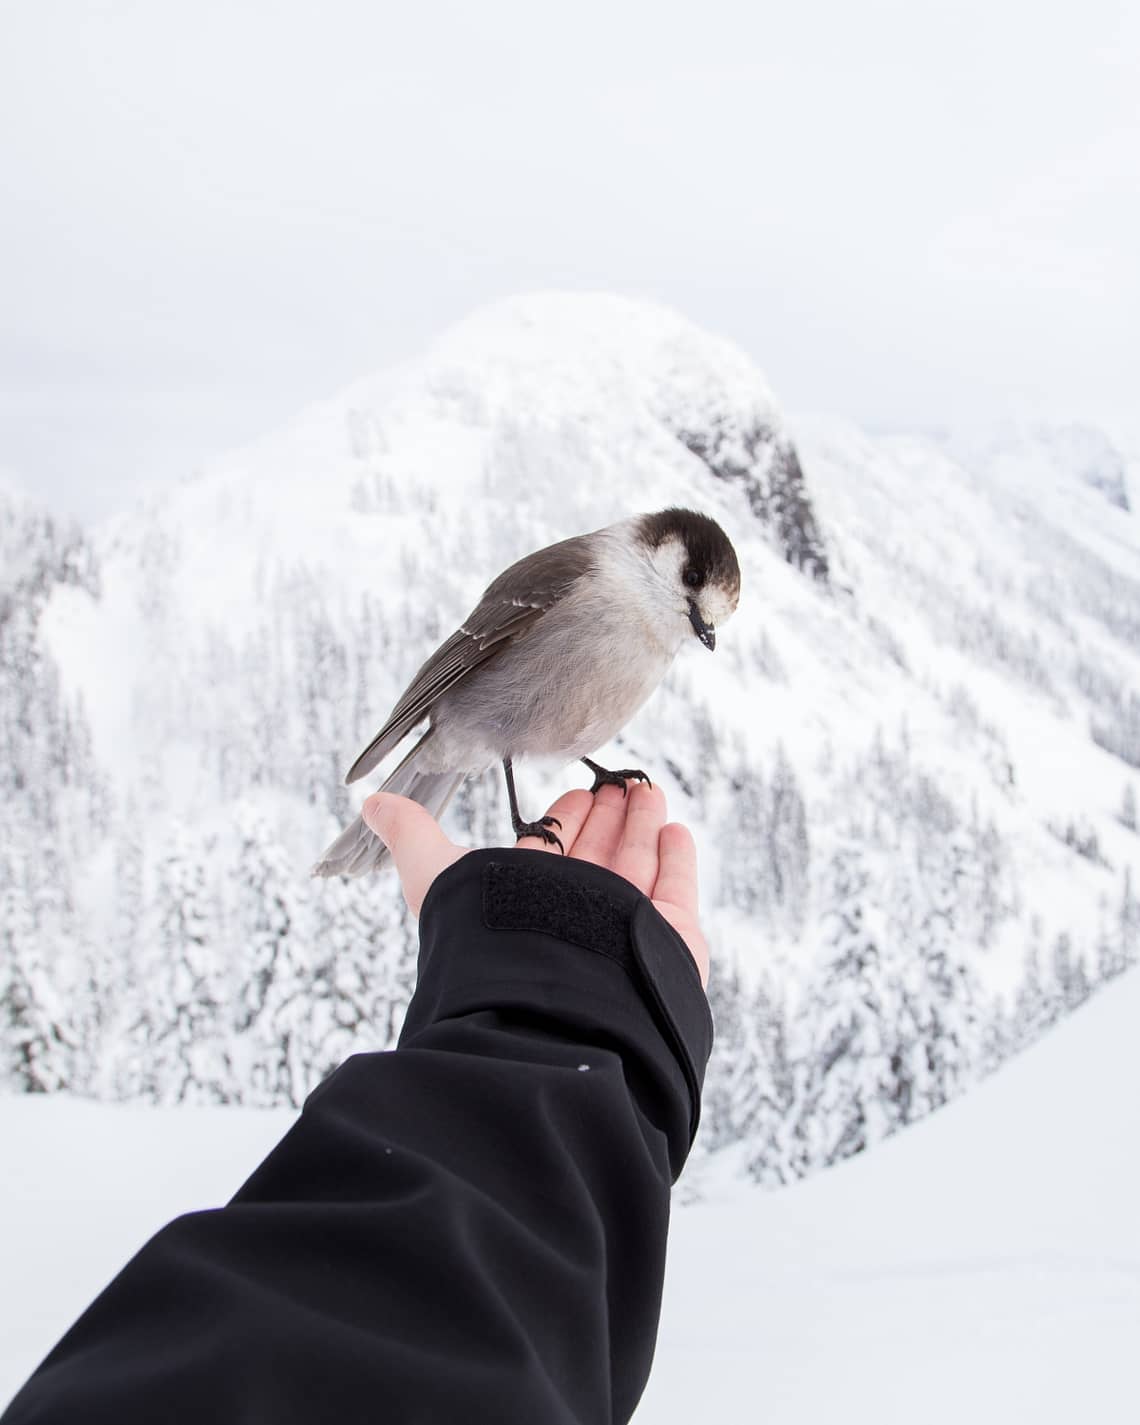 bird sitting on the hand of a person in winter